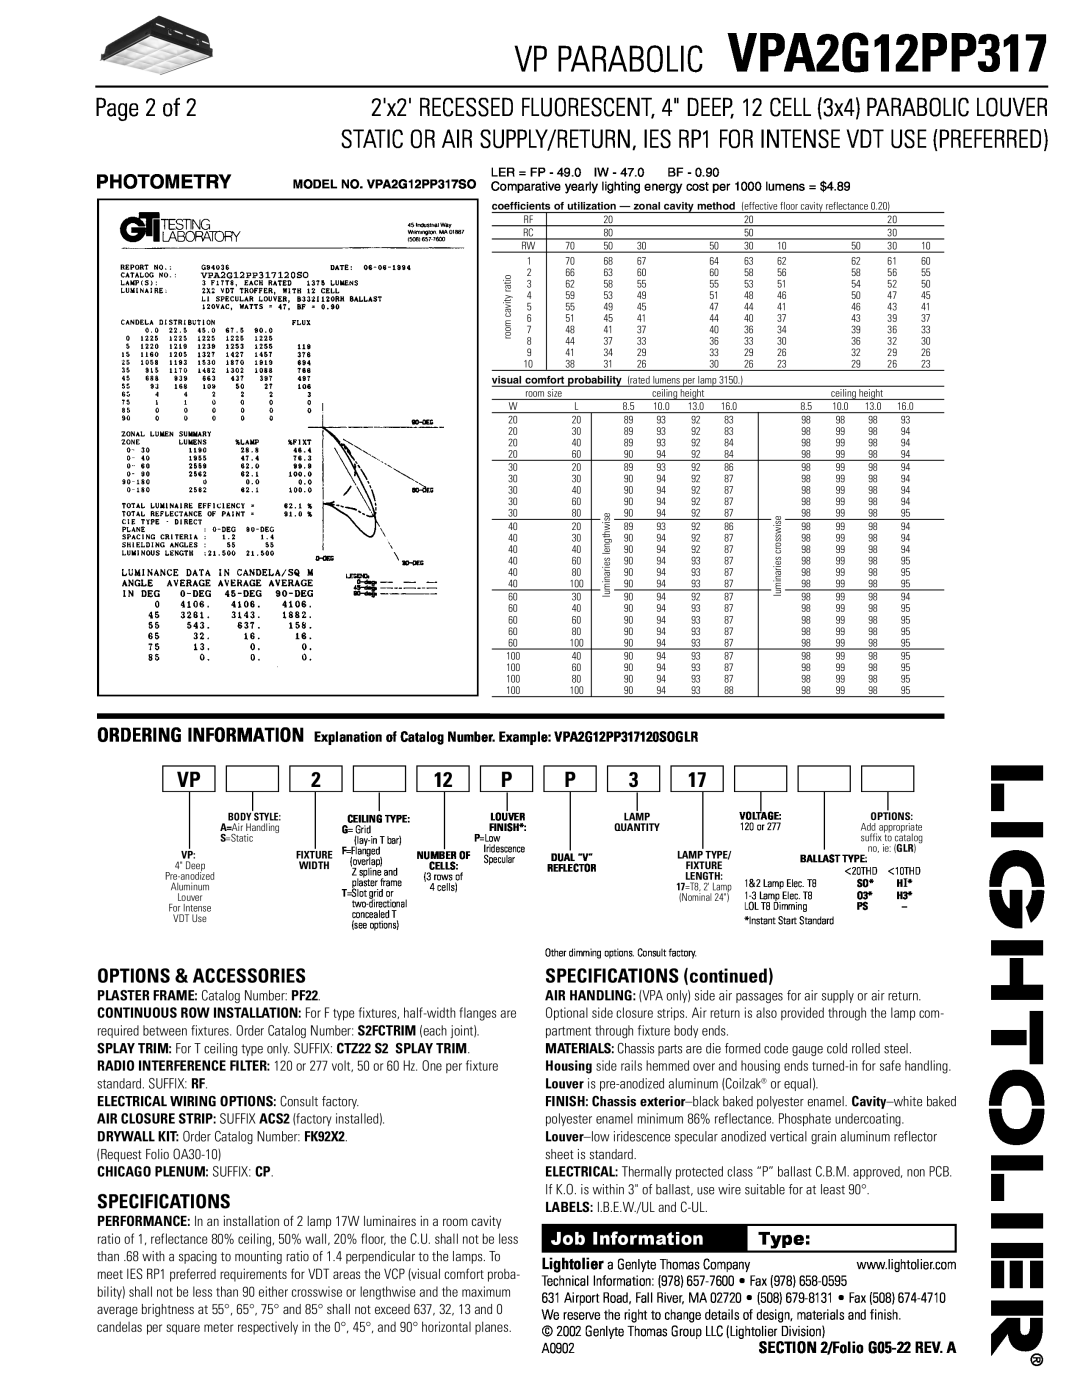 Lightolier VPA2G12PP317 dimensions Page 2 of, Options & Accessories, Specifications, SPECIFICATIONS continued, Photometry 